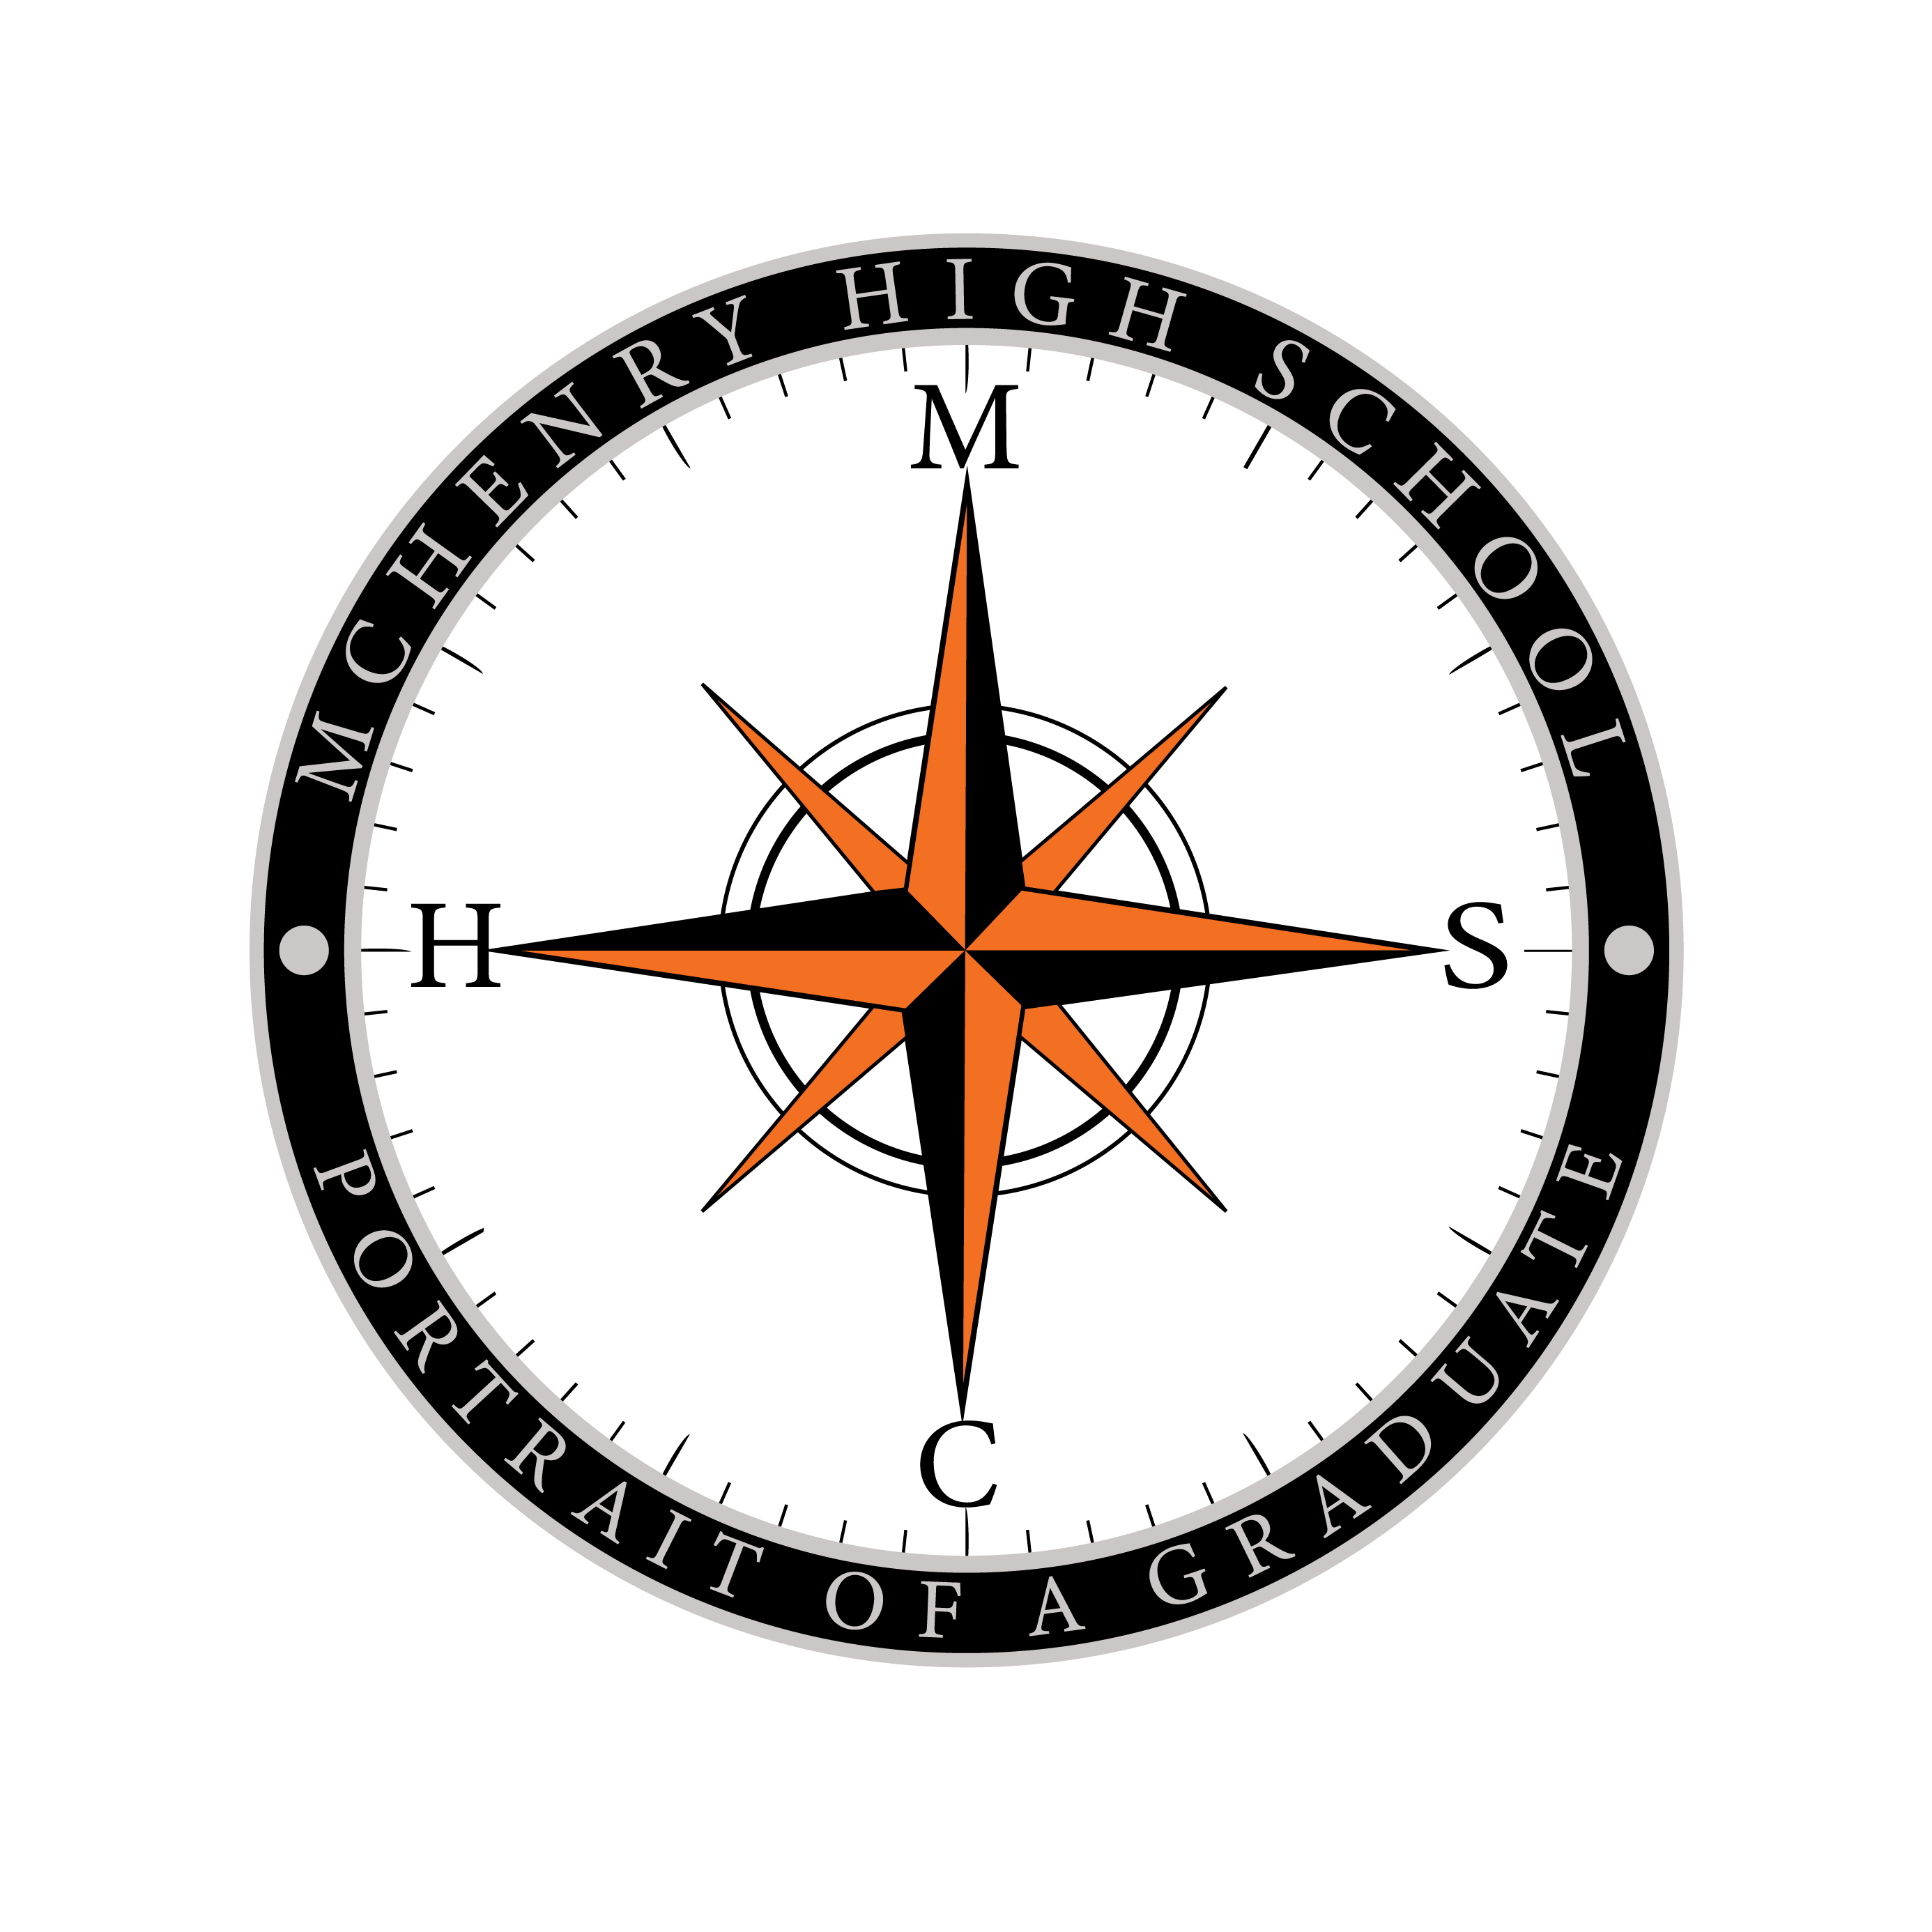 McHenry High School Compass pointing to M C H S